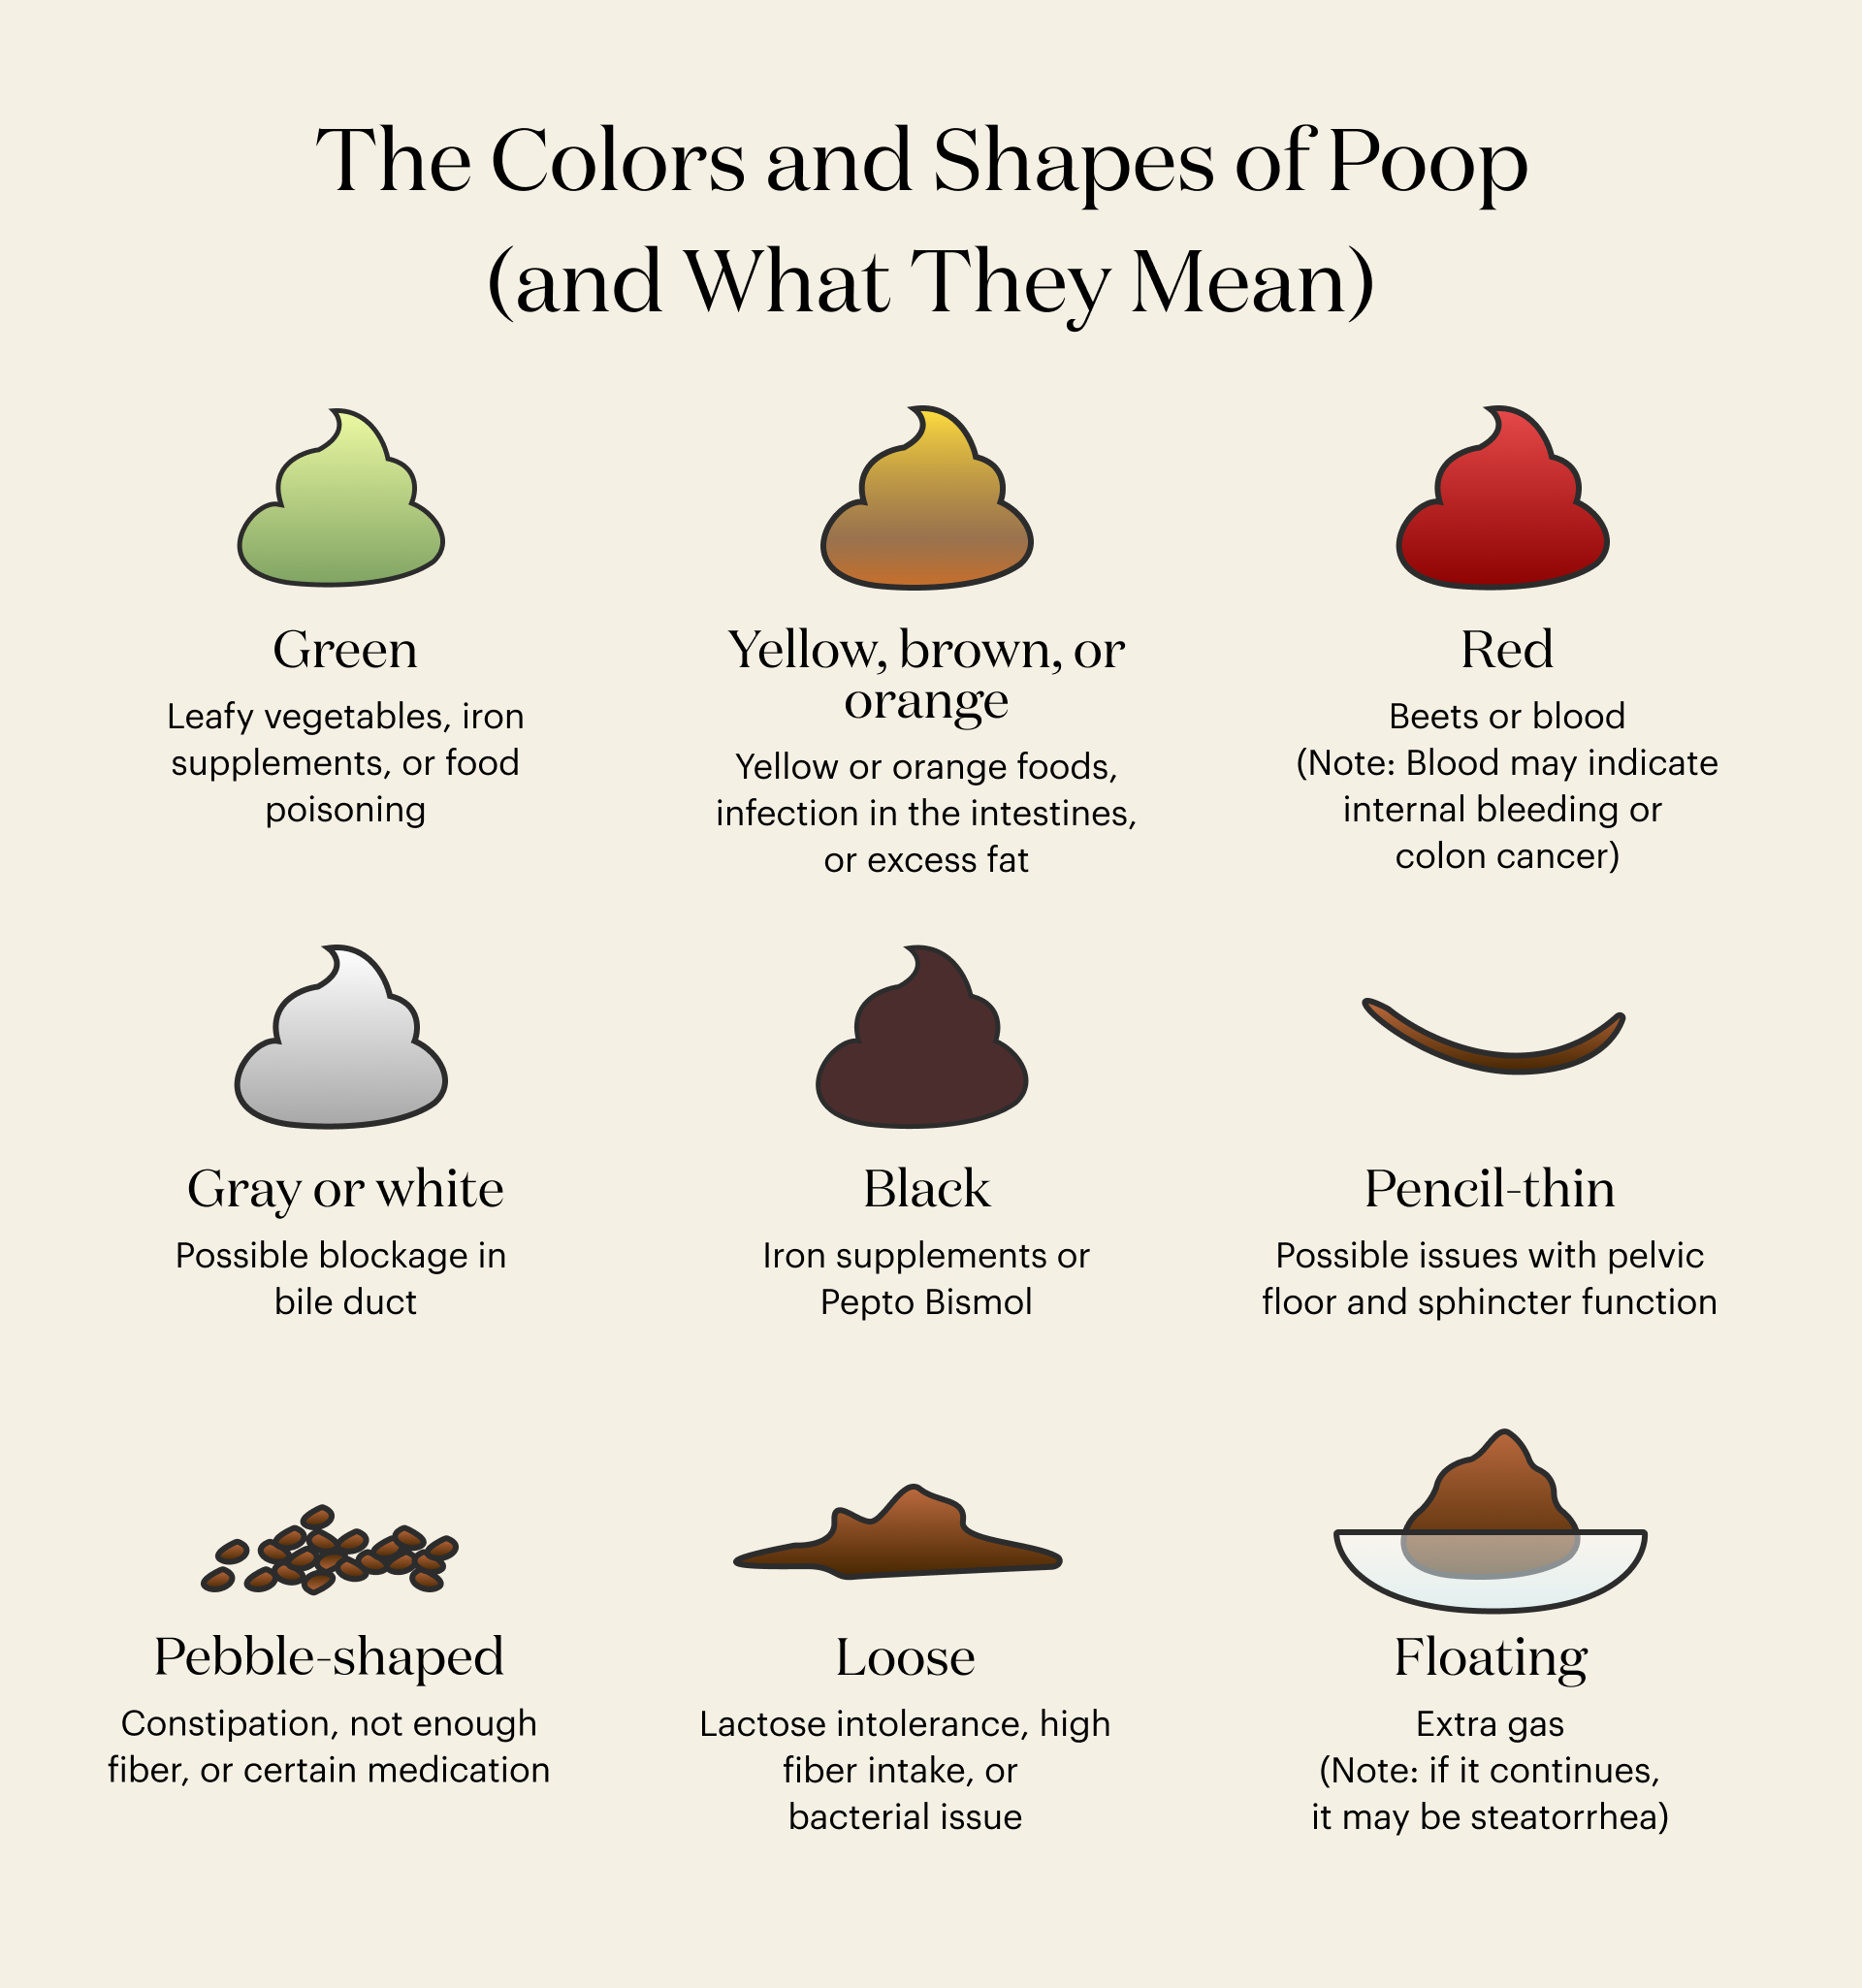 A poop color and shape chart